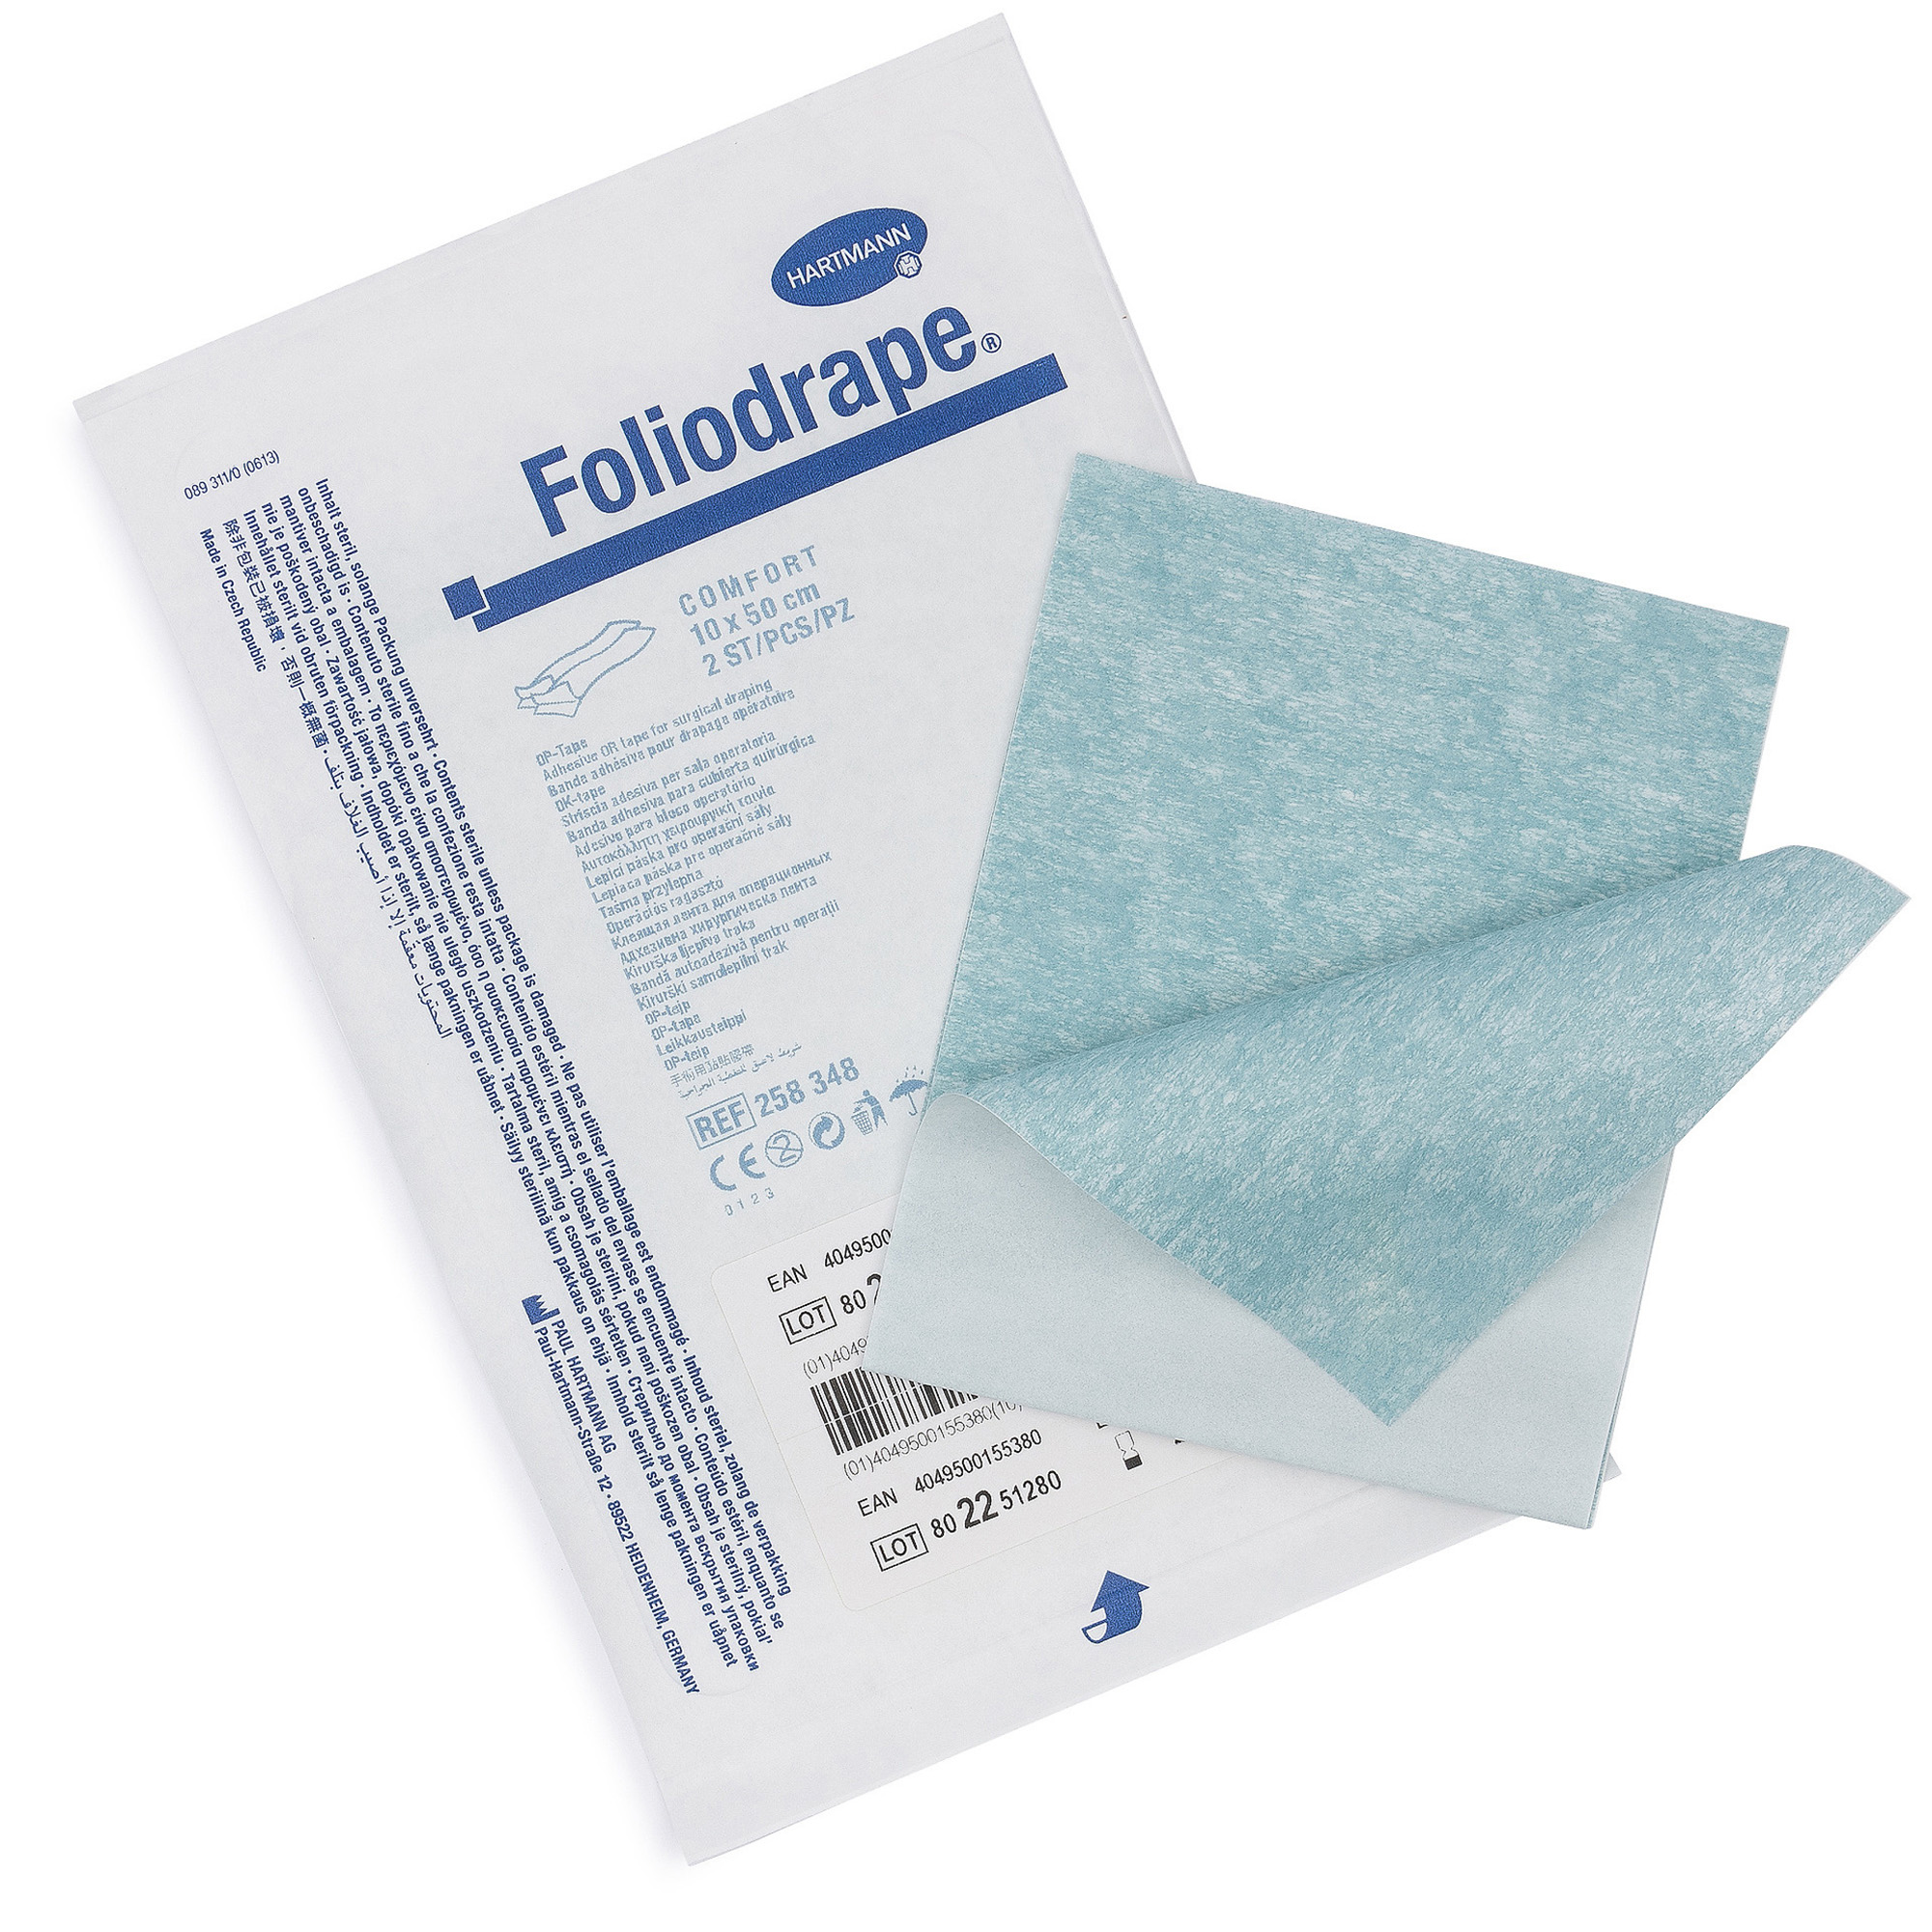 Hartmann Foliodrape® Surgical Adhesive Strips 10x50 cm sterile, paired packed